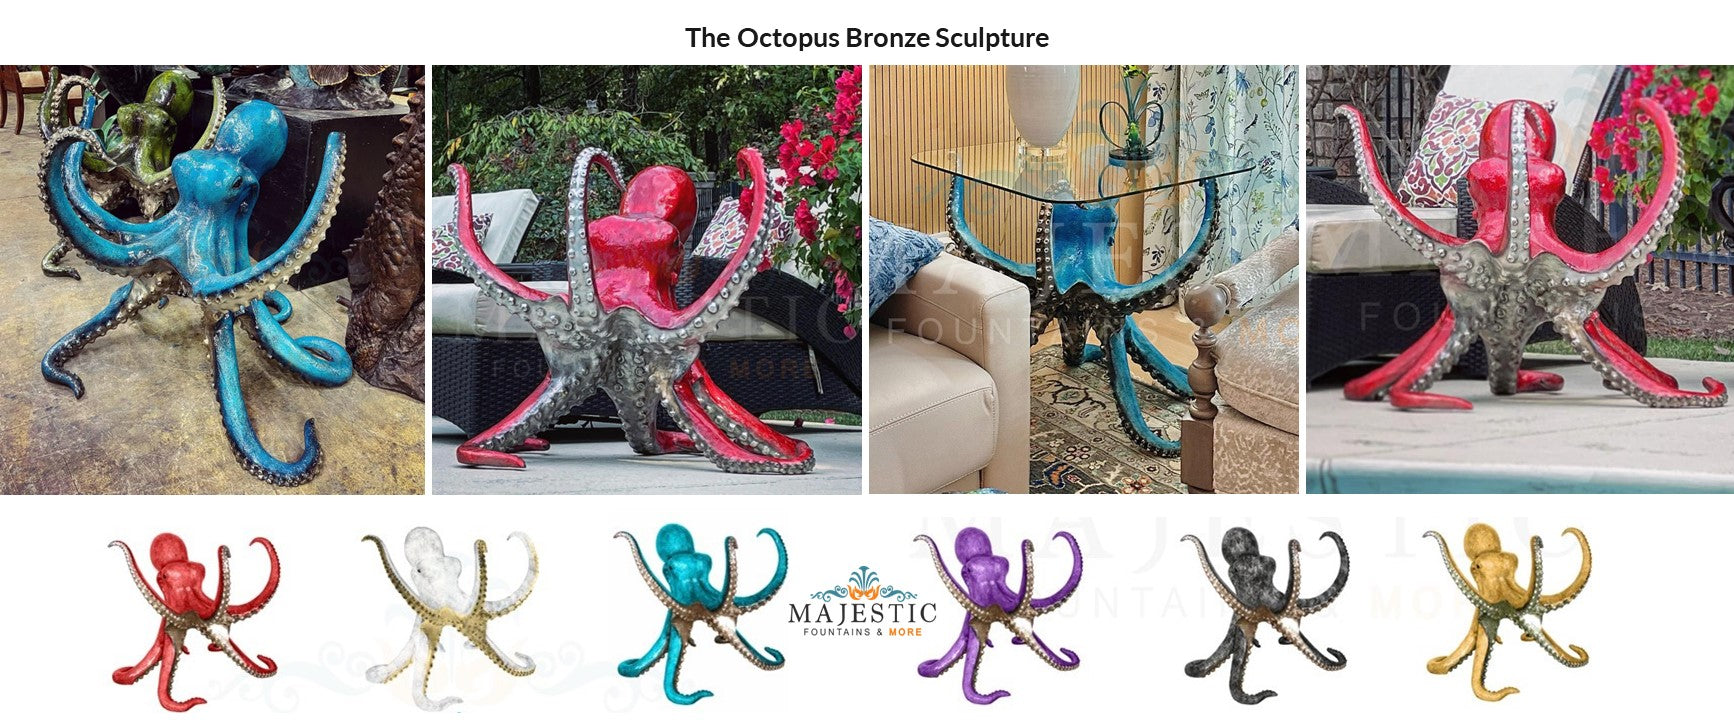 Octopus Bronze Sculpture - Majestic Fountains and More.